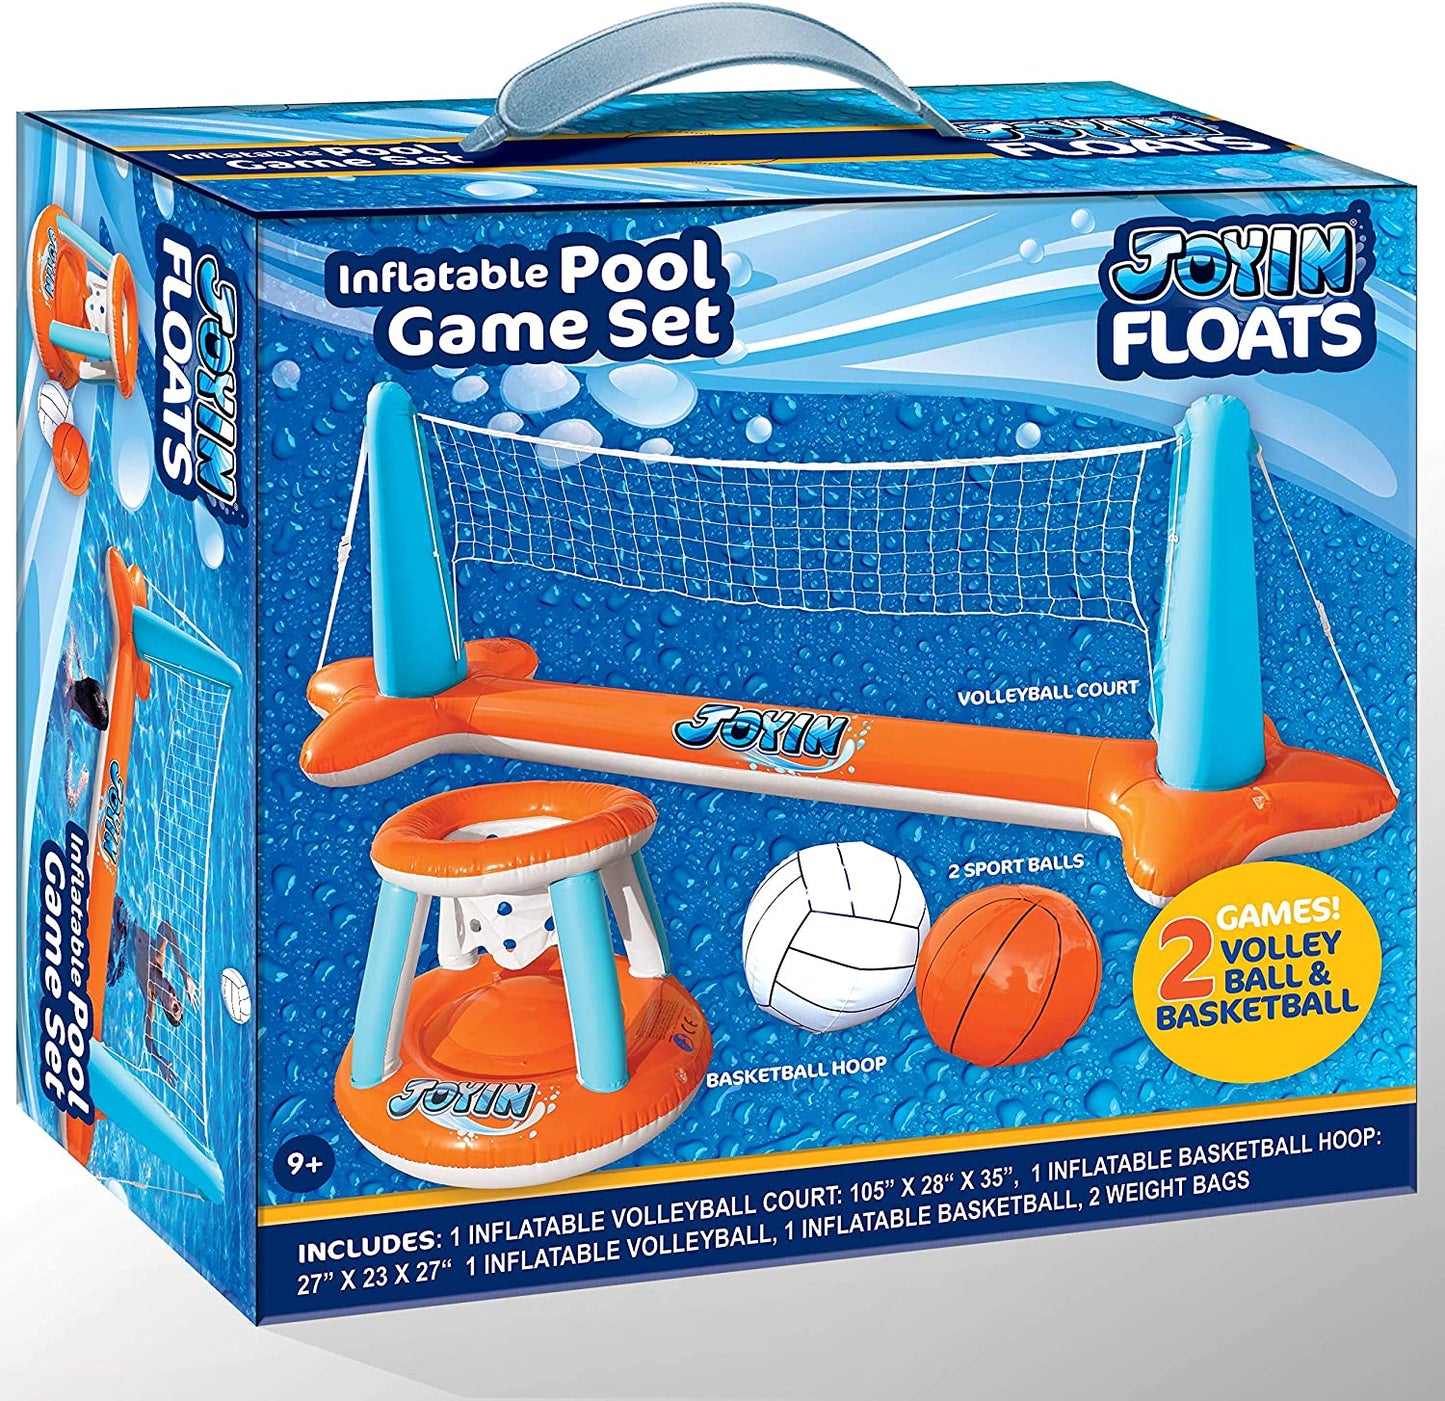 Inflatable Pool Float Volleyball Net & Basketball Hoops Set